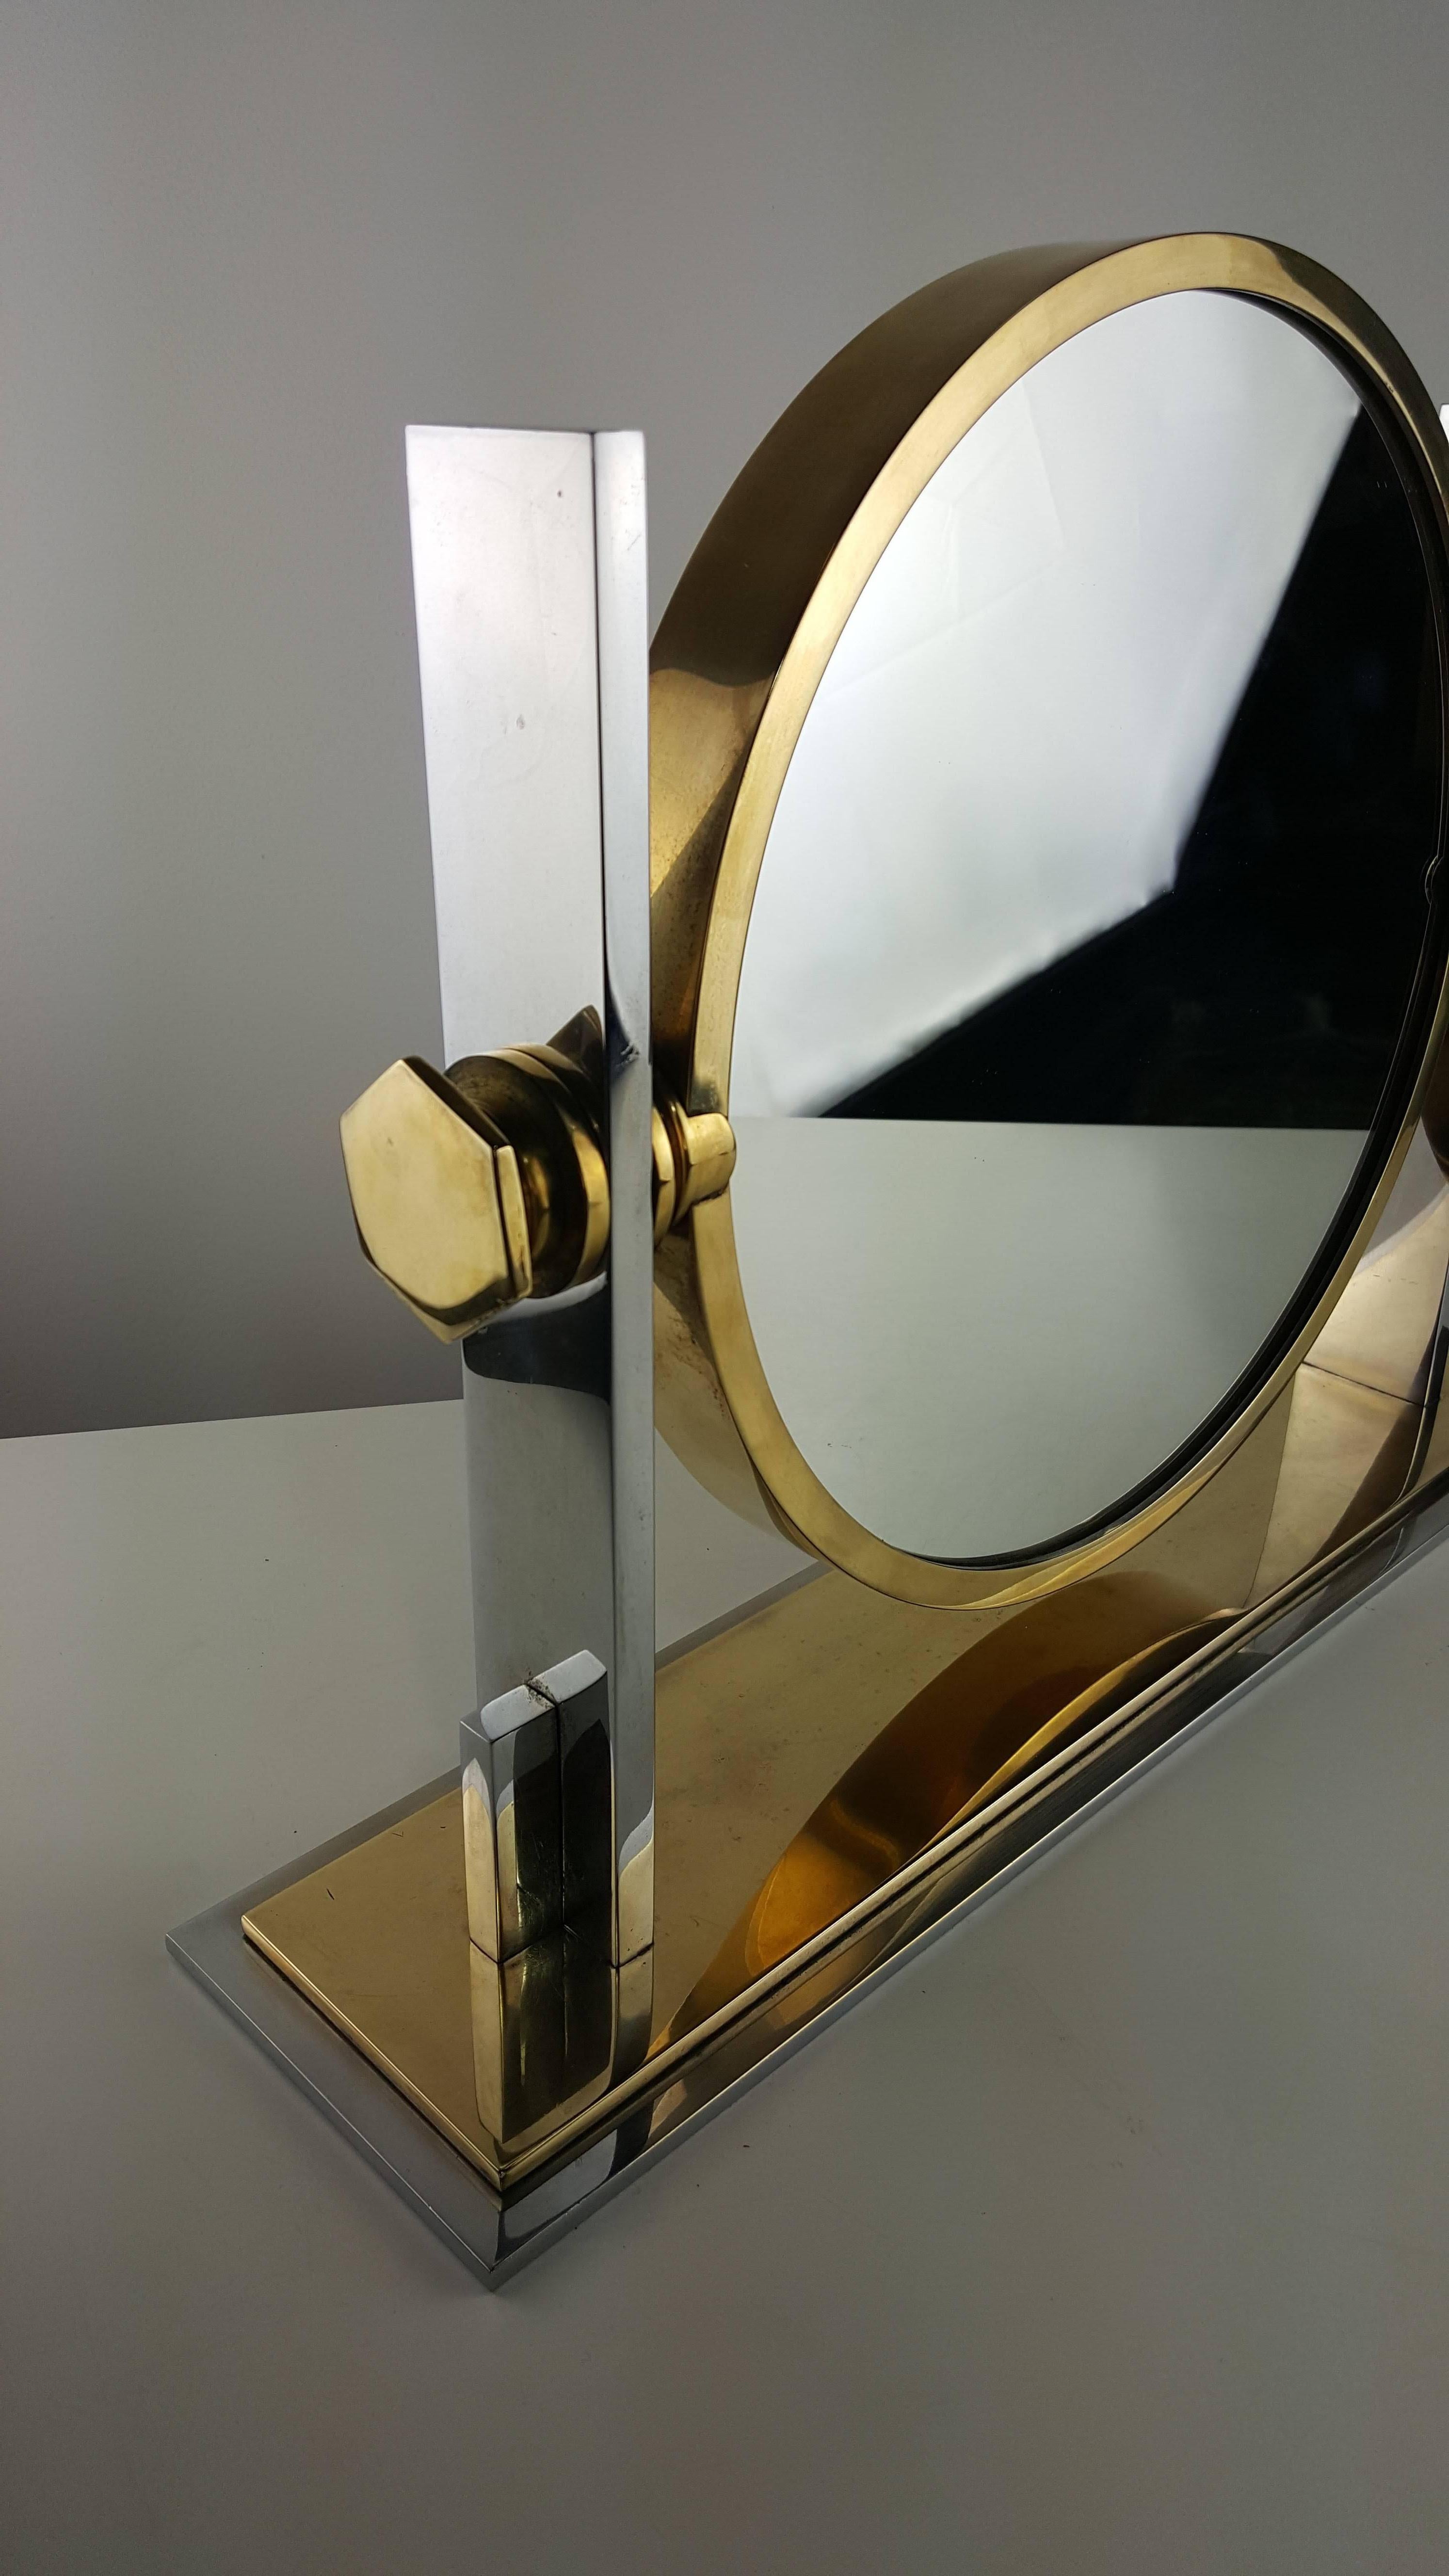 Late 20th Century Gorgeous Two-Sided Vanity Mirror in Chrome and Brass by Karl Springer, 1970s